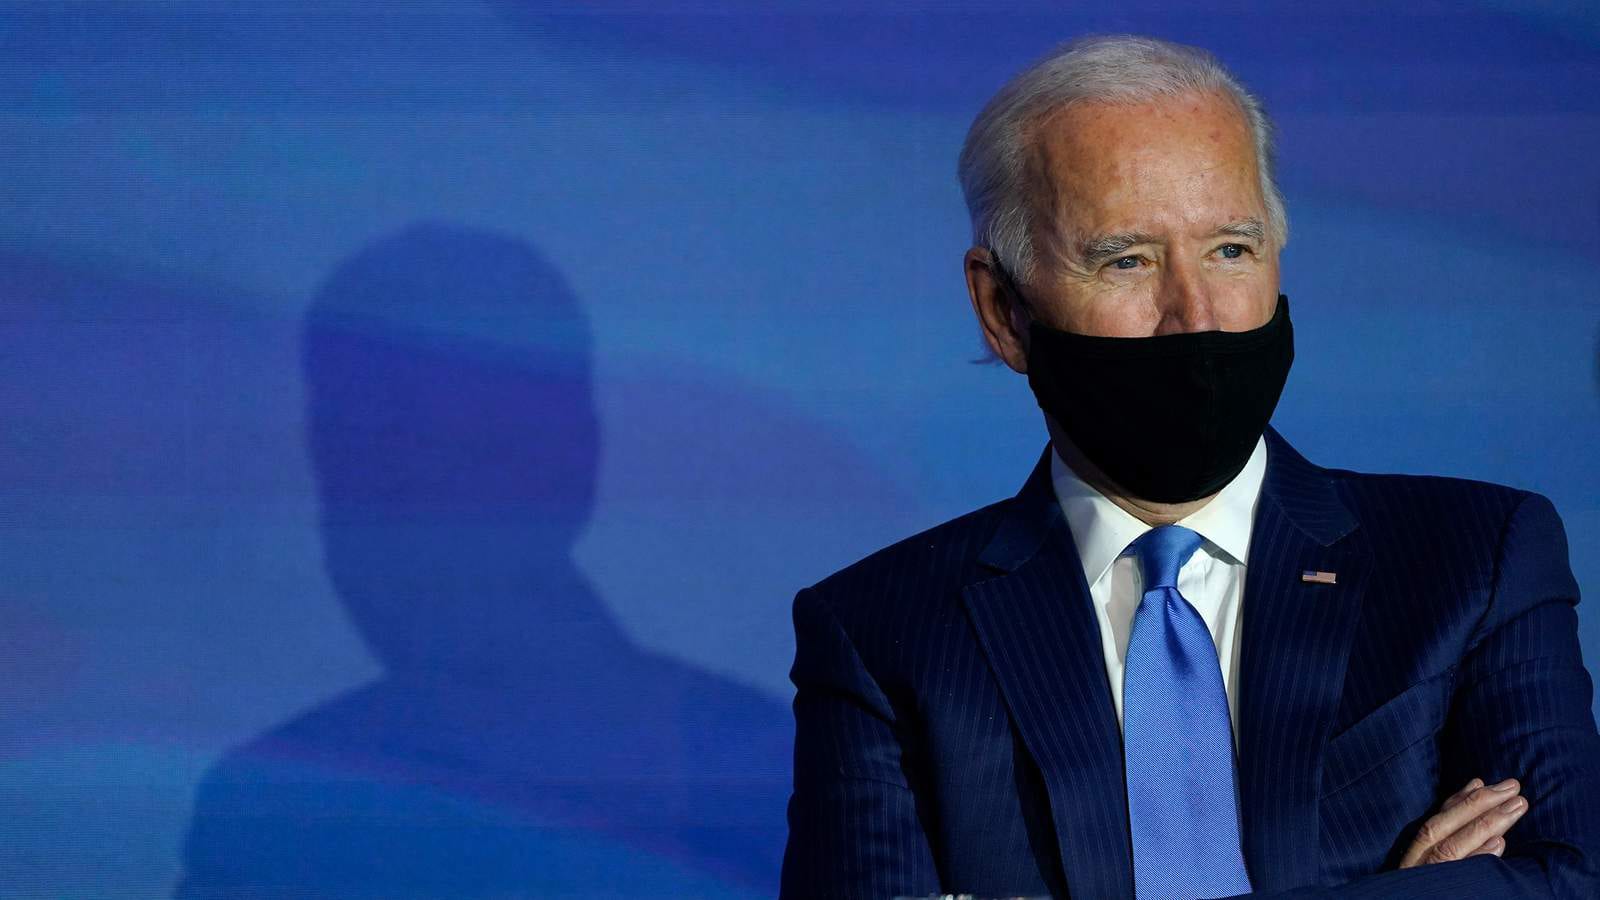 The Biden Administration and Covid-19 Response